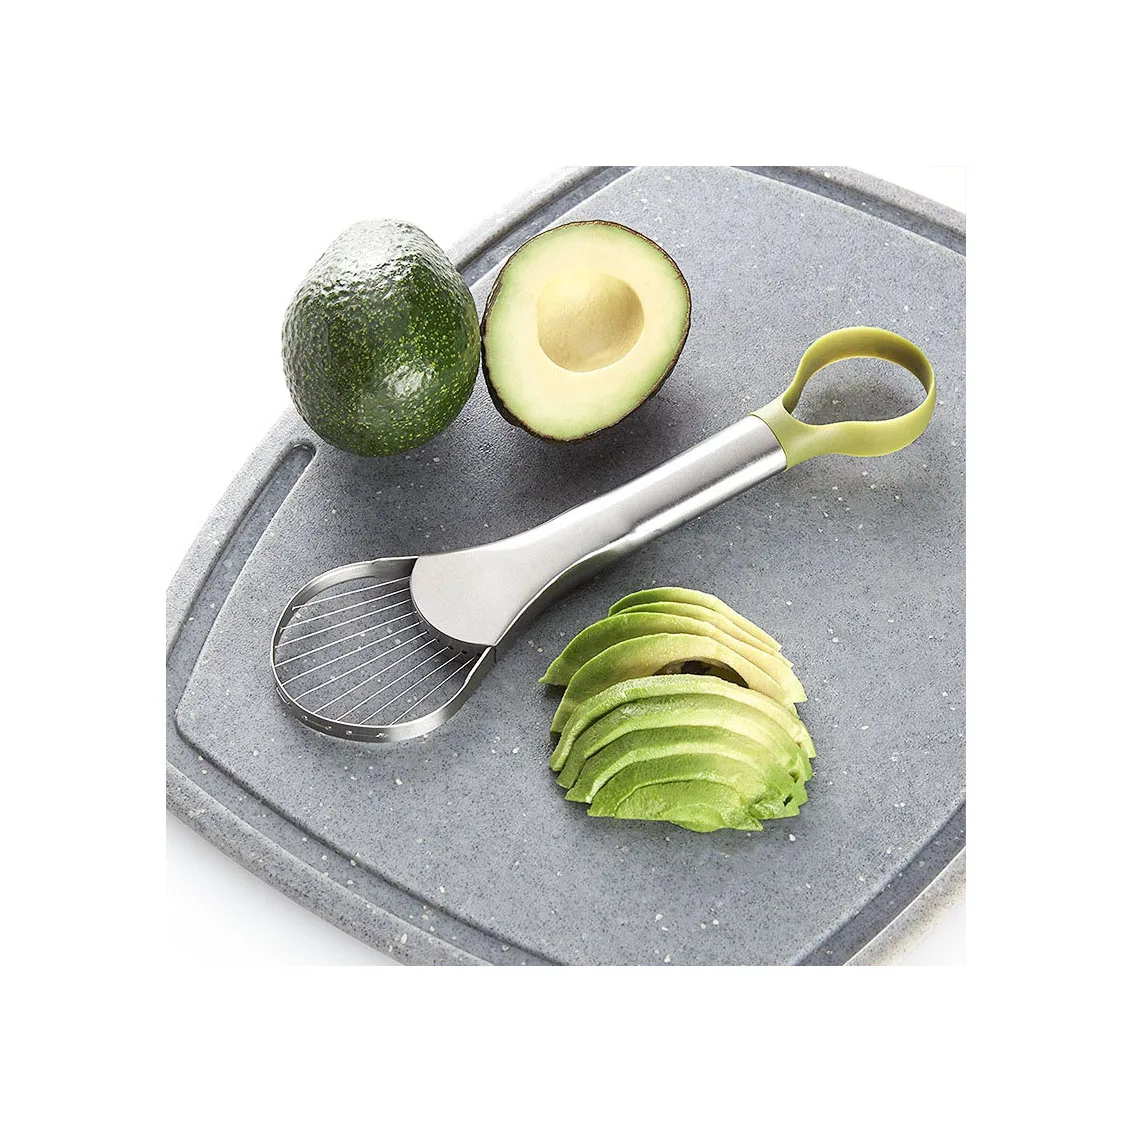 2023 Hot sell Kitchen accessories Kitchen tool multi purpose stainless steel avocado cutter avocado slicer fruit cutter